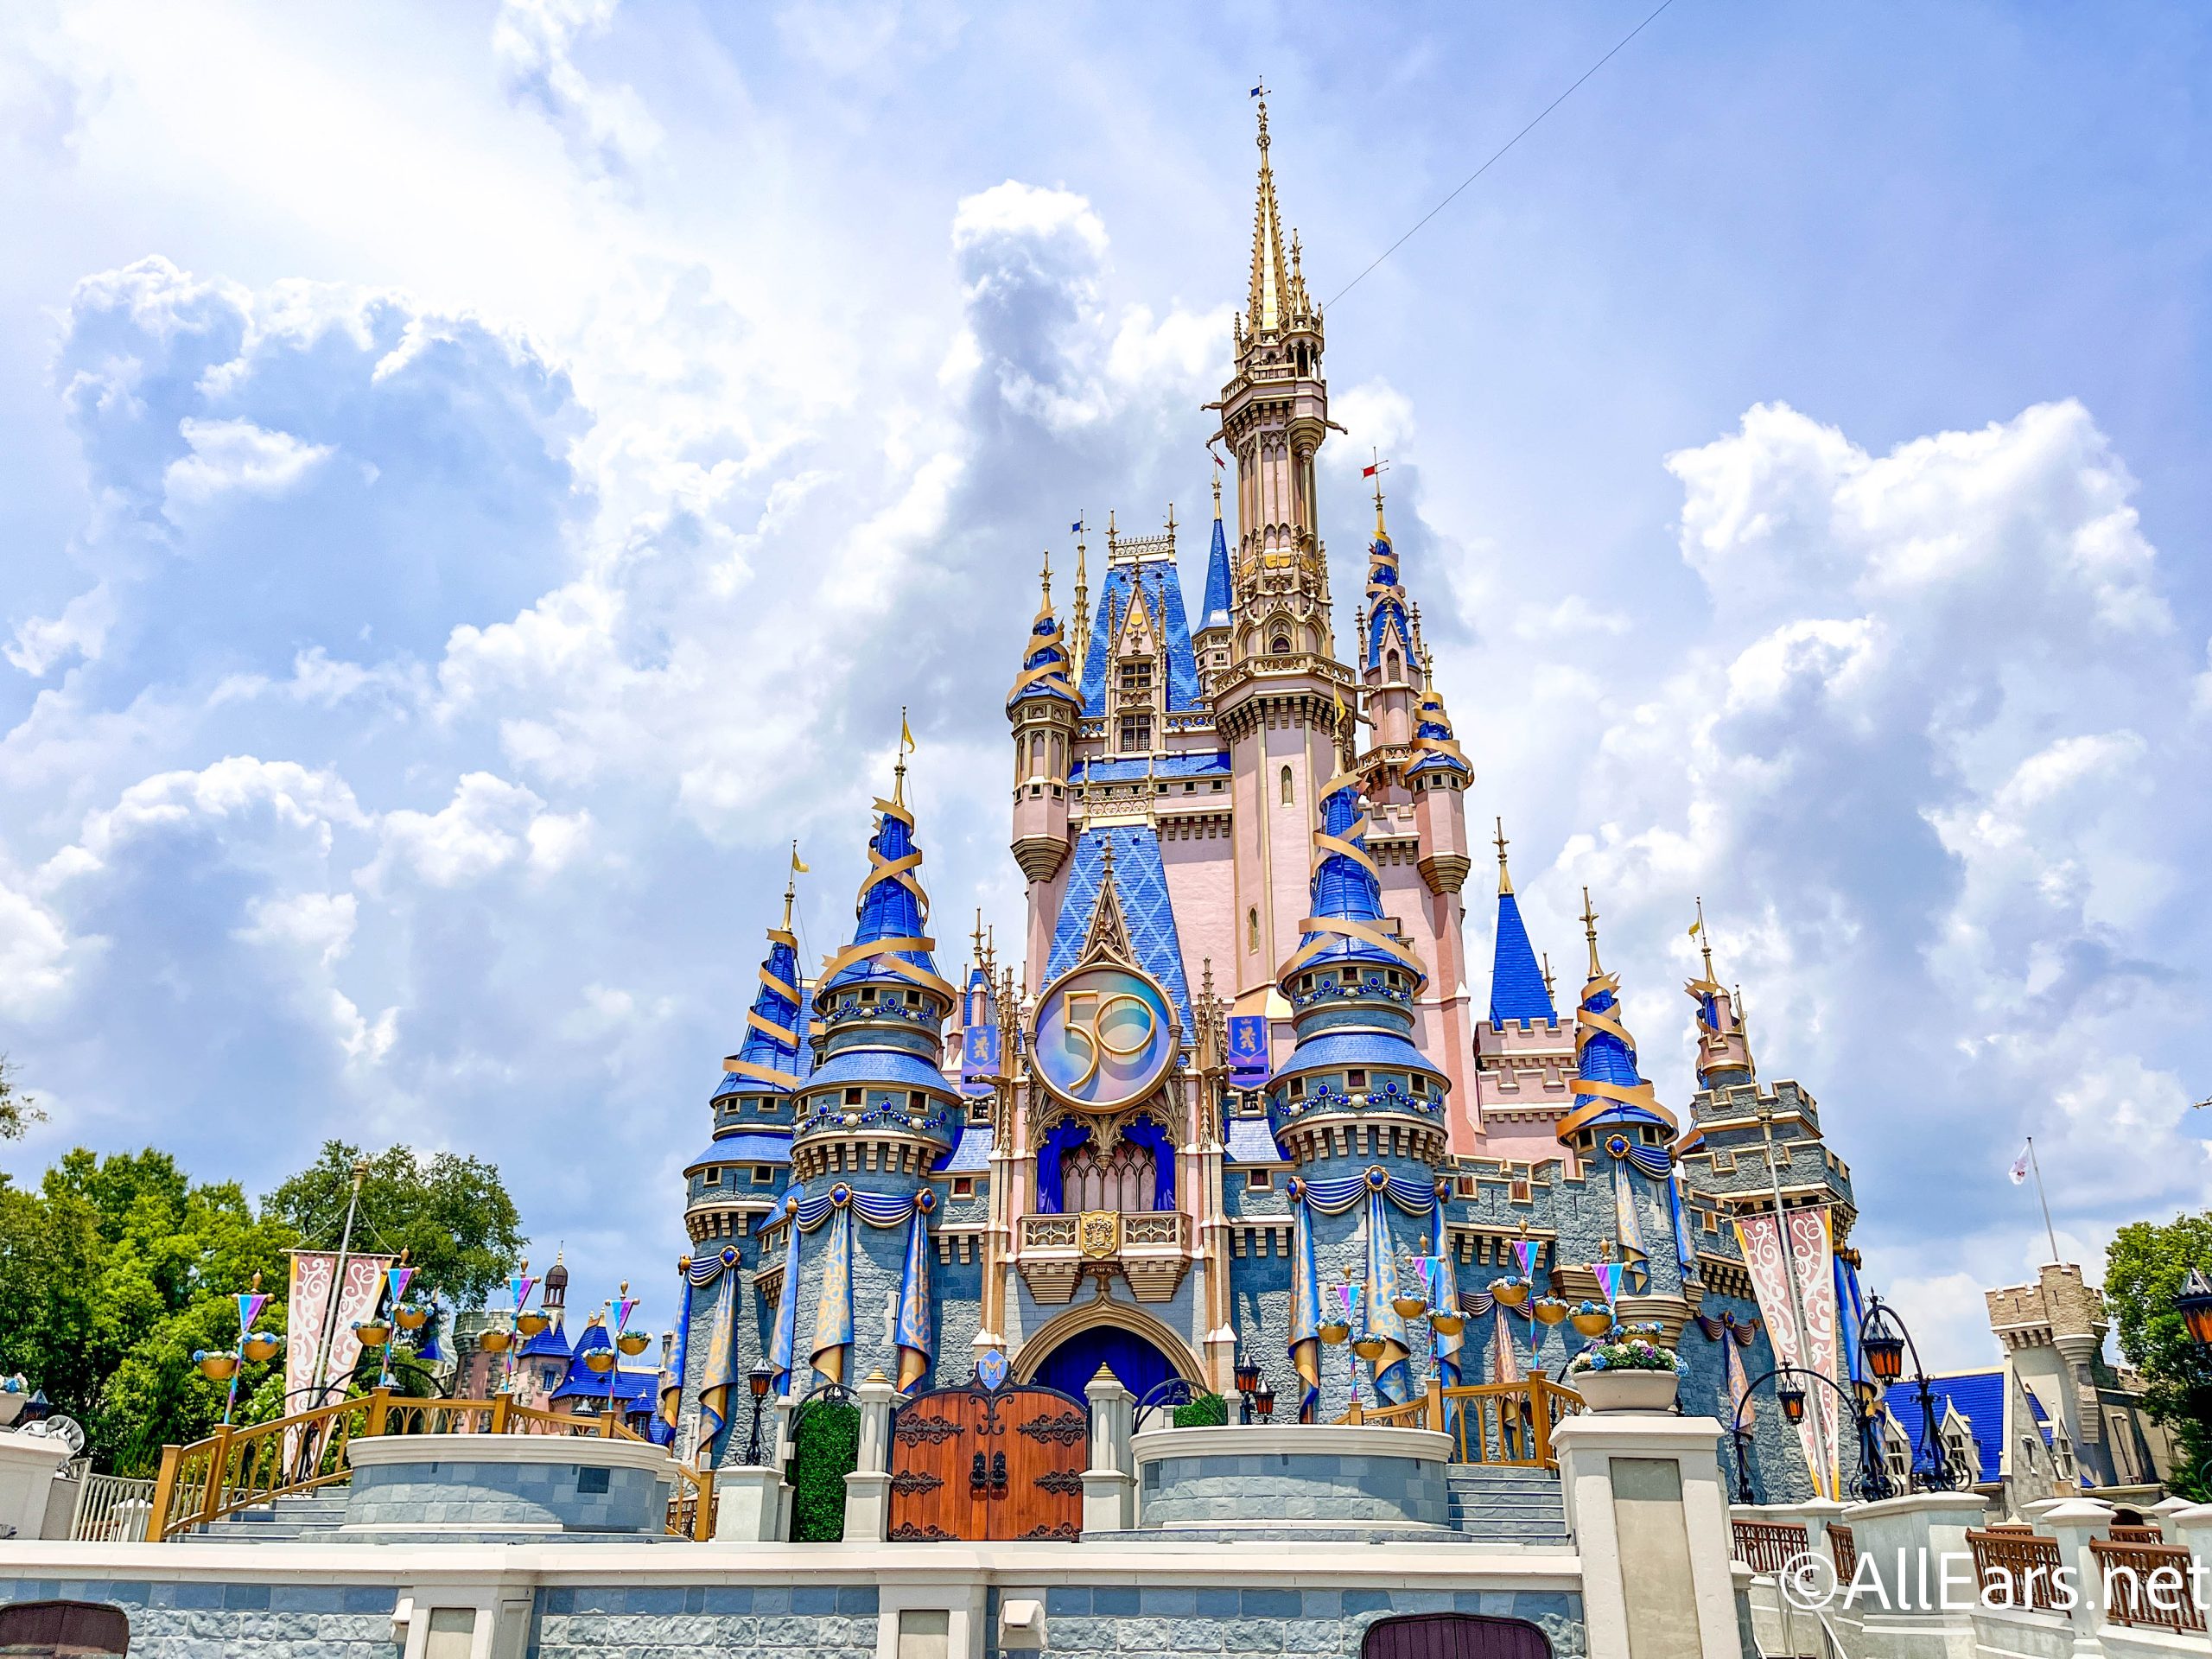 https://allears.net/wp-content/uploads/2022/08/wdw-2022-magic-kingdom-cinderella-castle-stock-stage-2-scaled.jpg